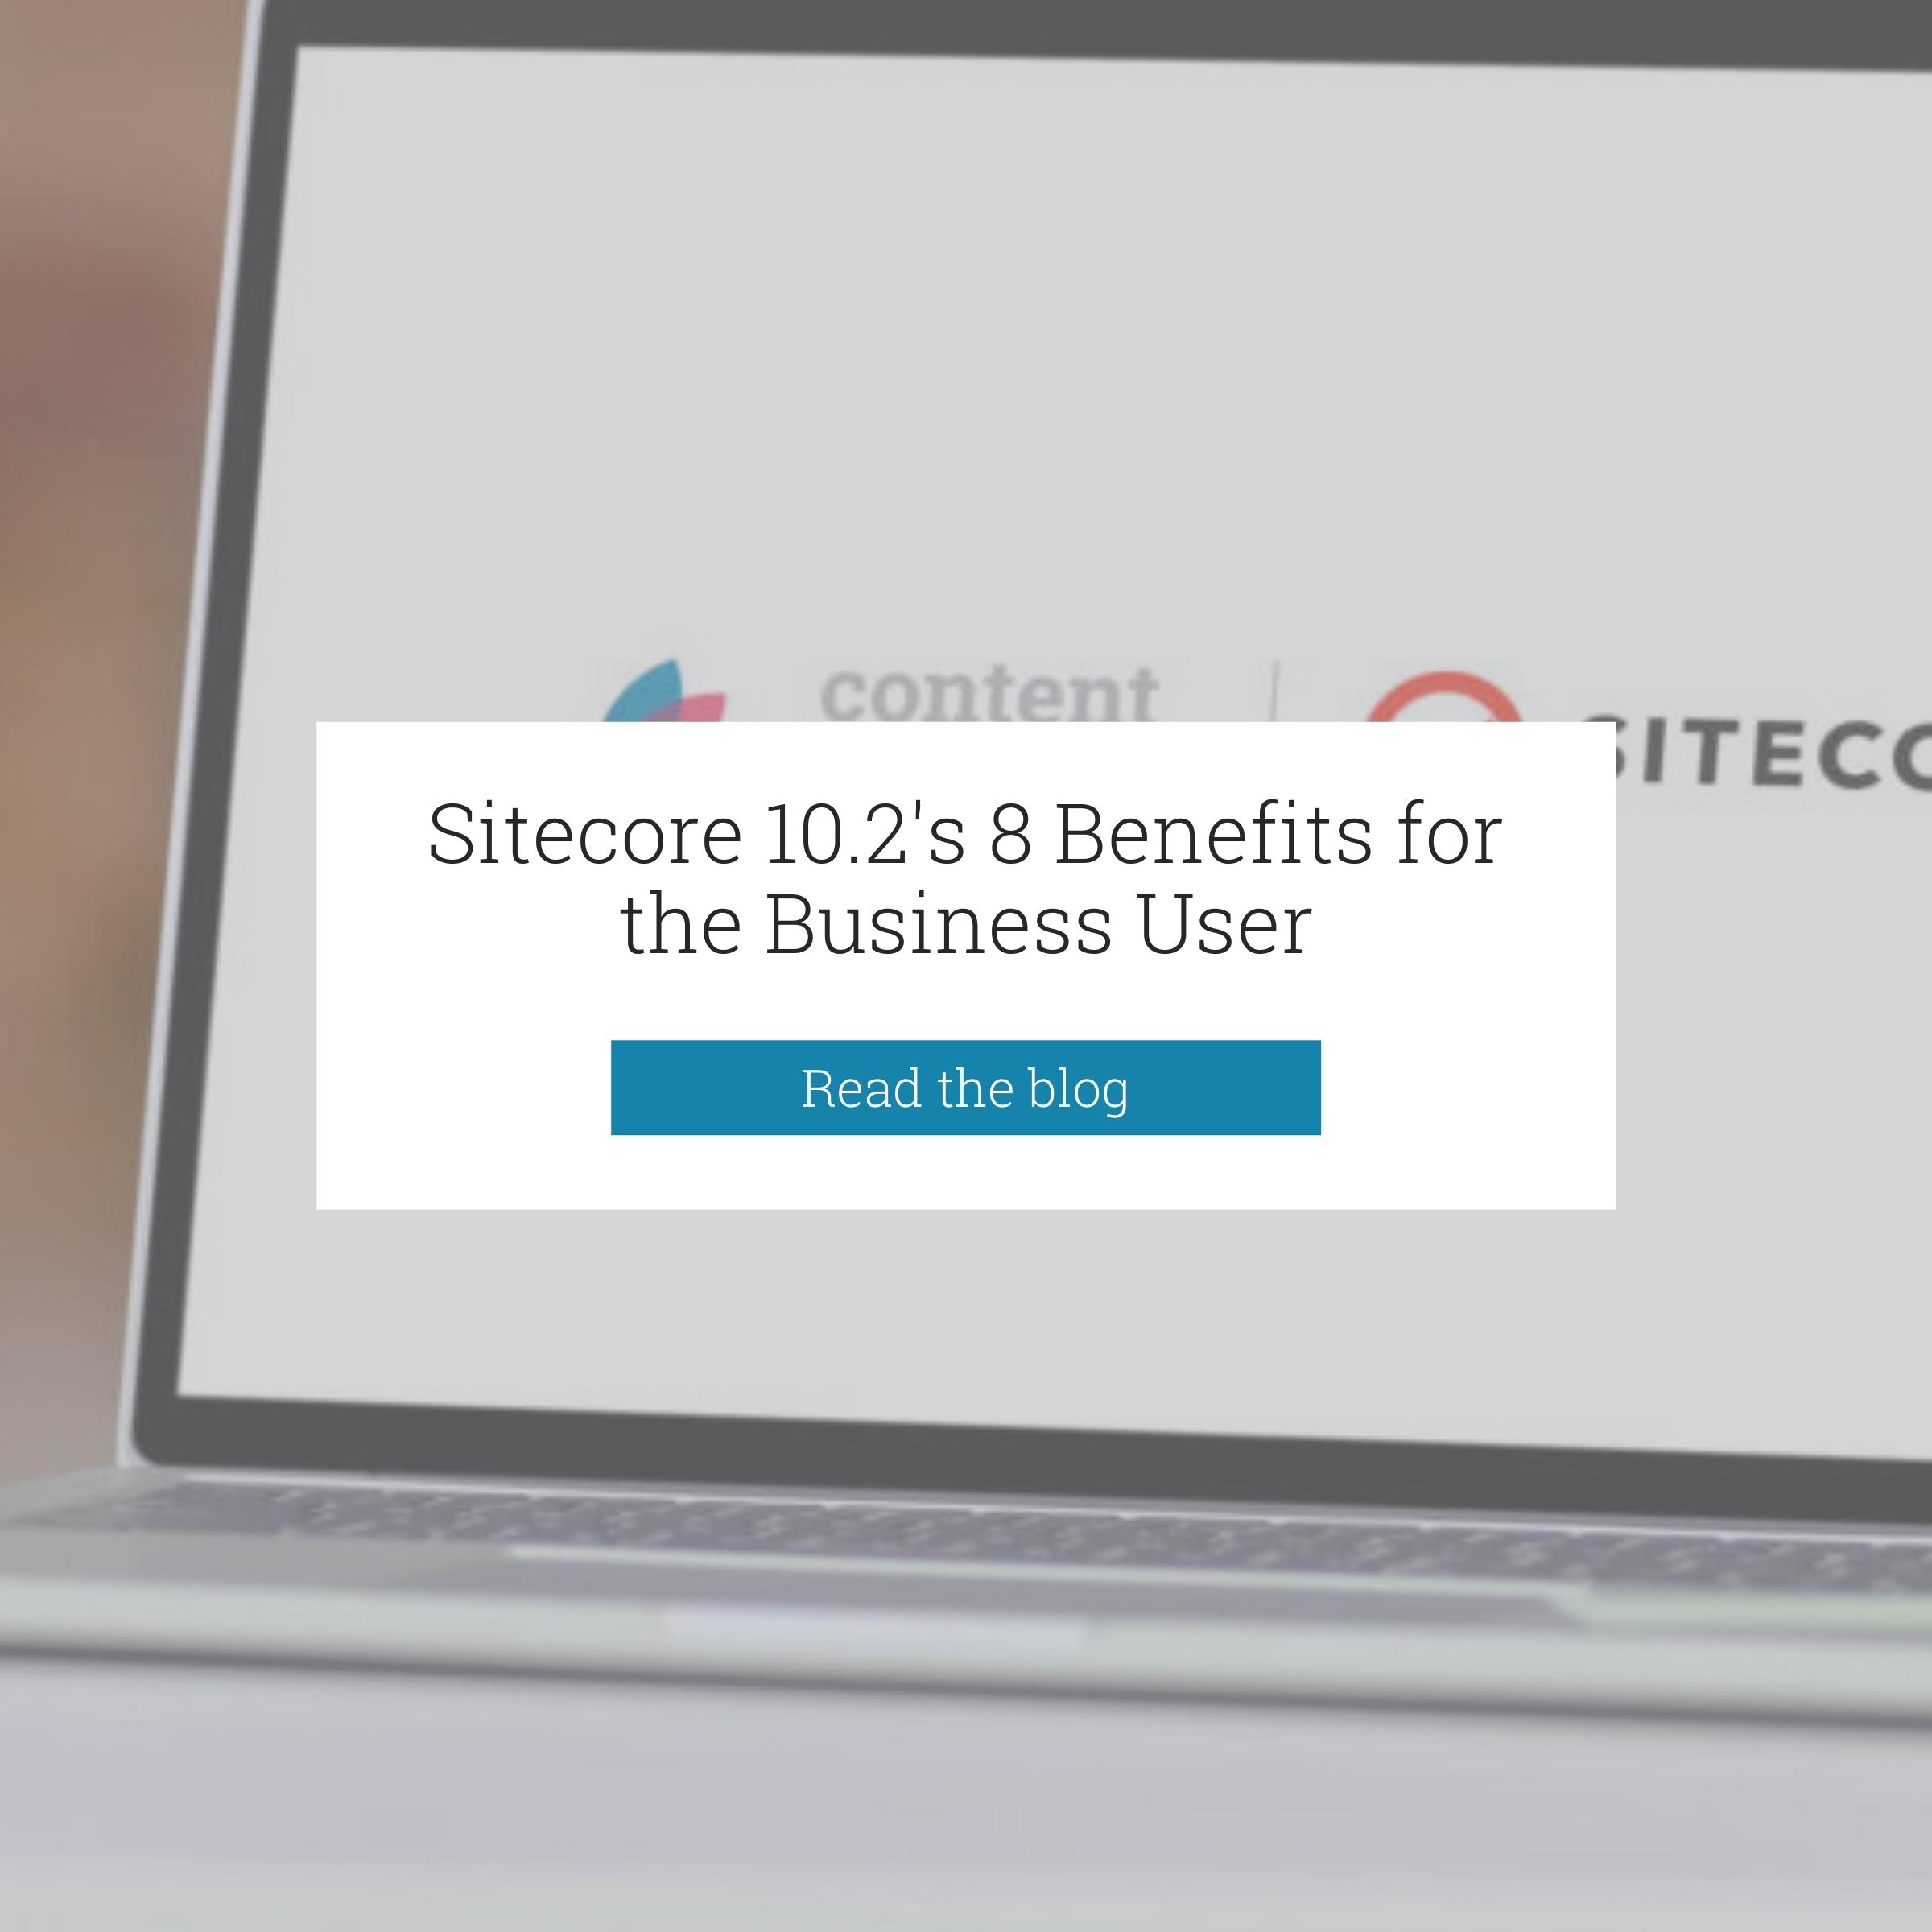 sitecre 10.2 blog promoting the user benefits